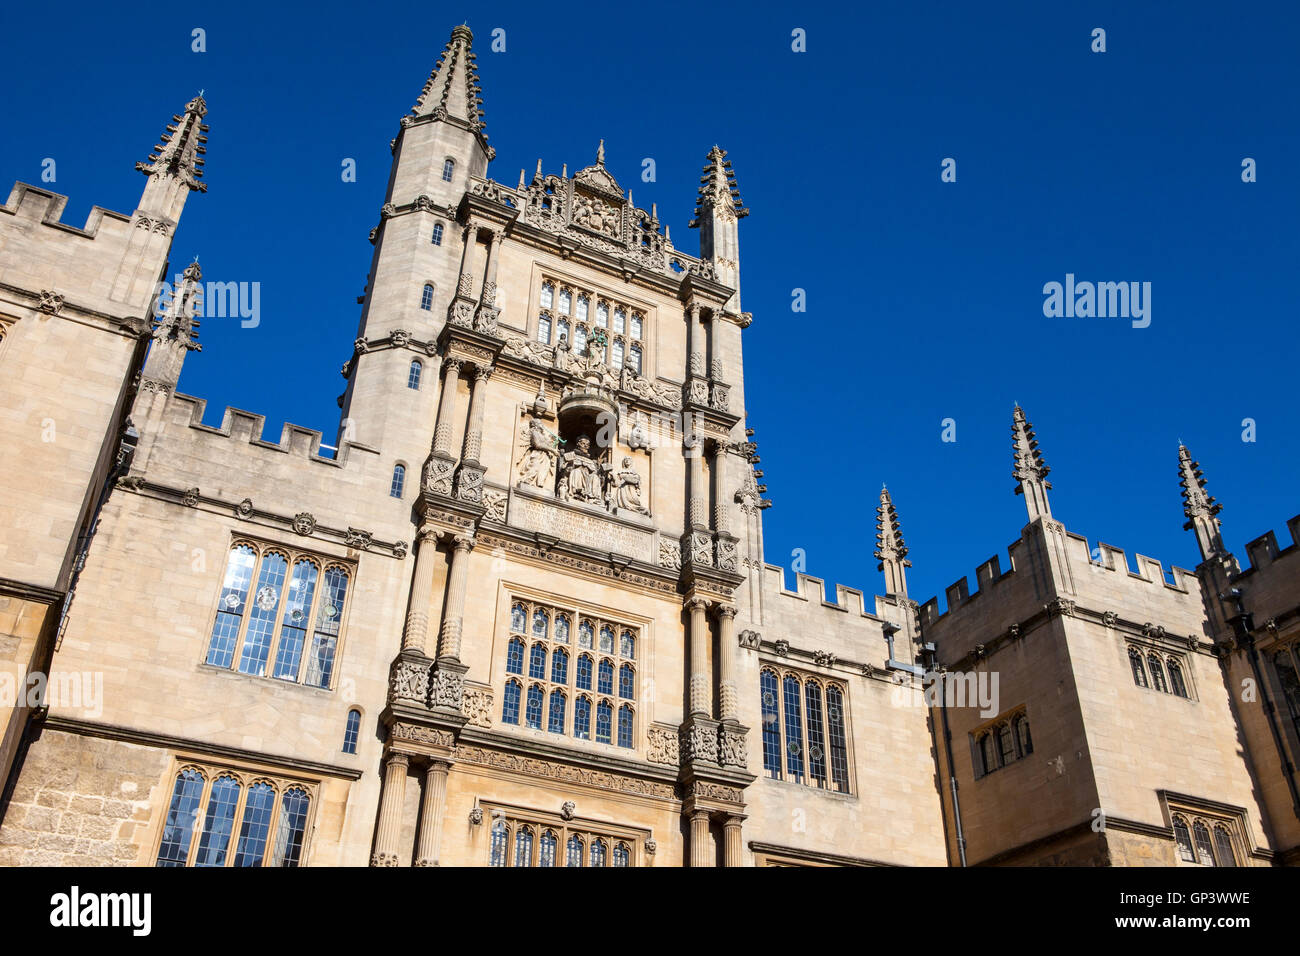 The Tower of the Five Orders housing the Bodleian Library in Oxford, England.  It is one of the oldest libraries in Europe. Stock Photo